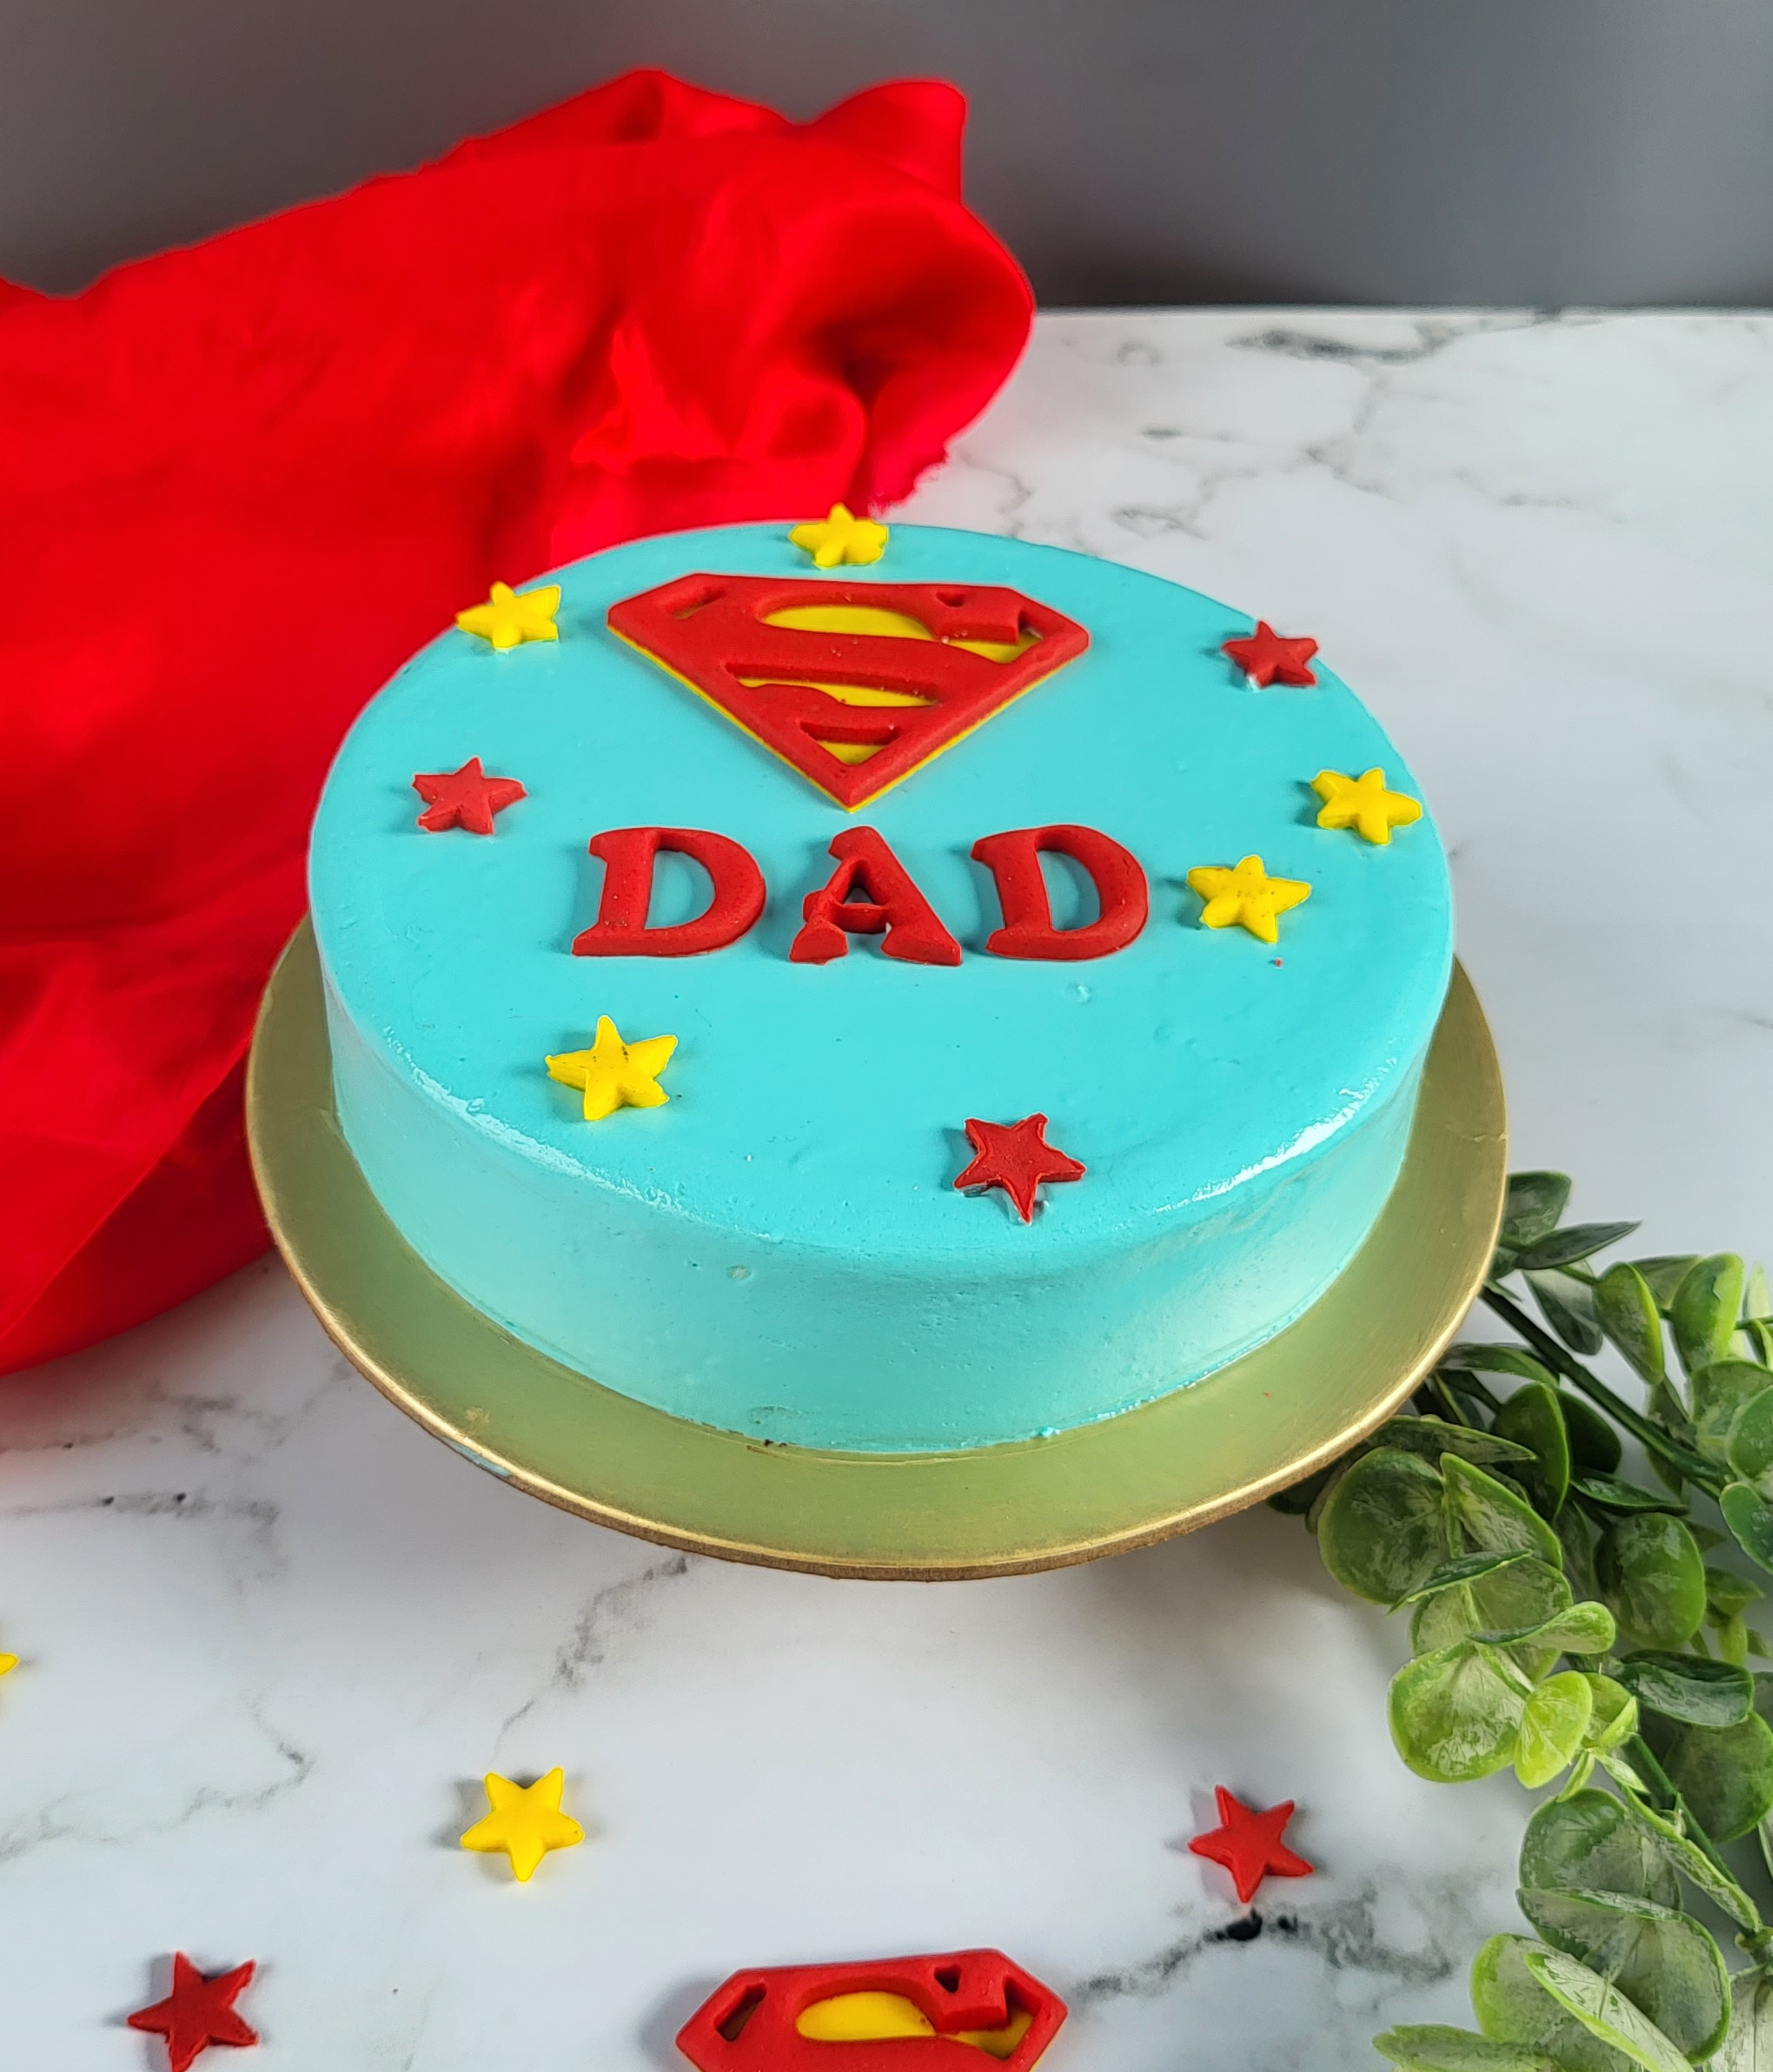 How To Make a Cute Father's Day Cake - Find Your Cake Inspiration